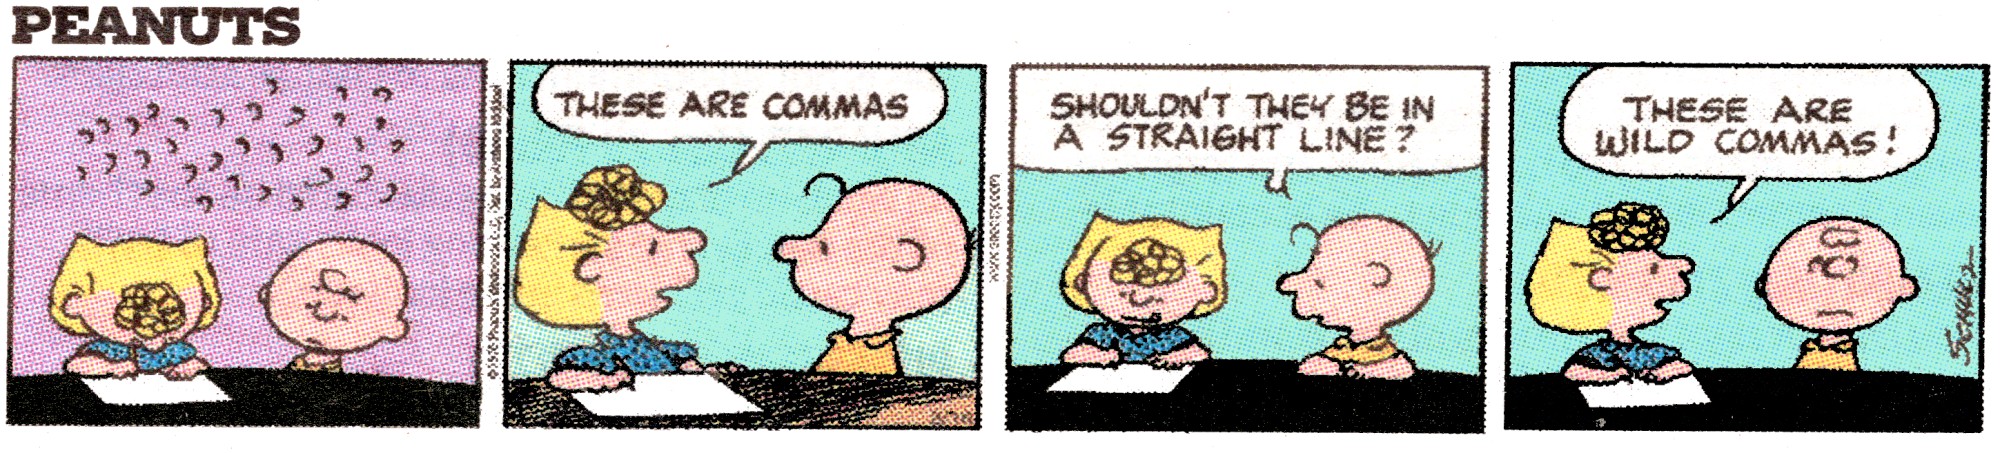 [The Peanuts Cartoon that Inspired this Blog]